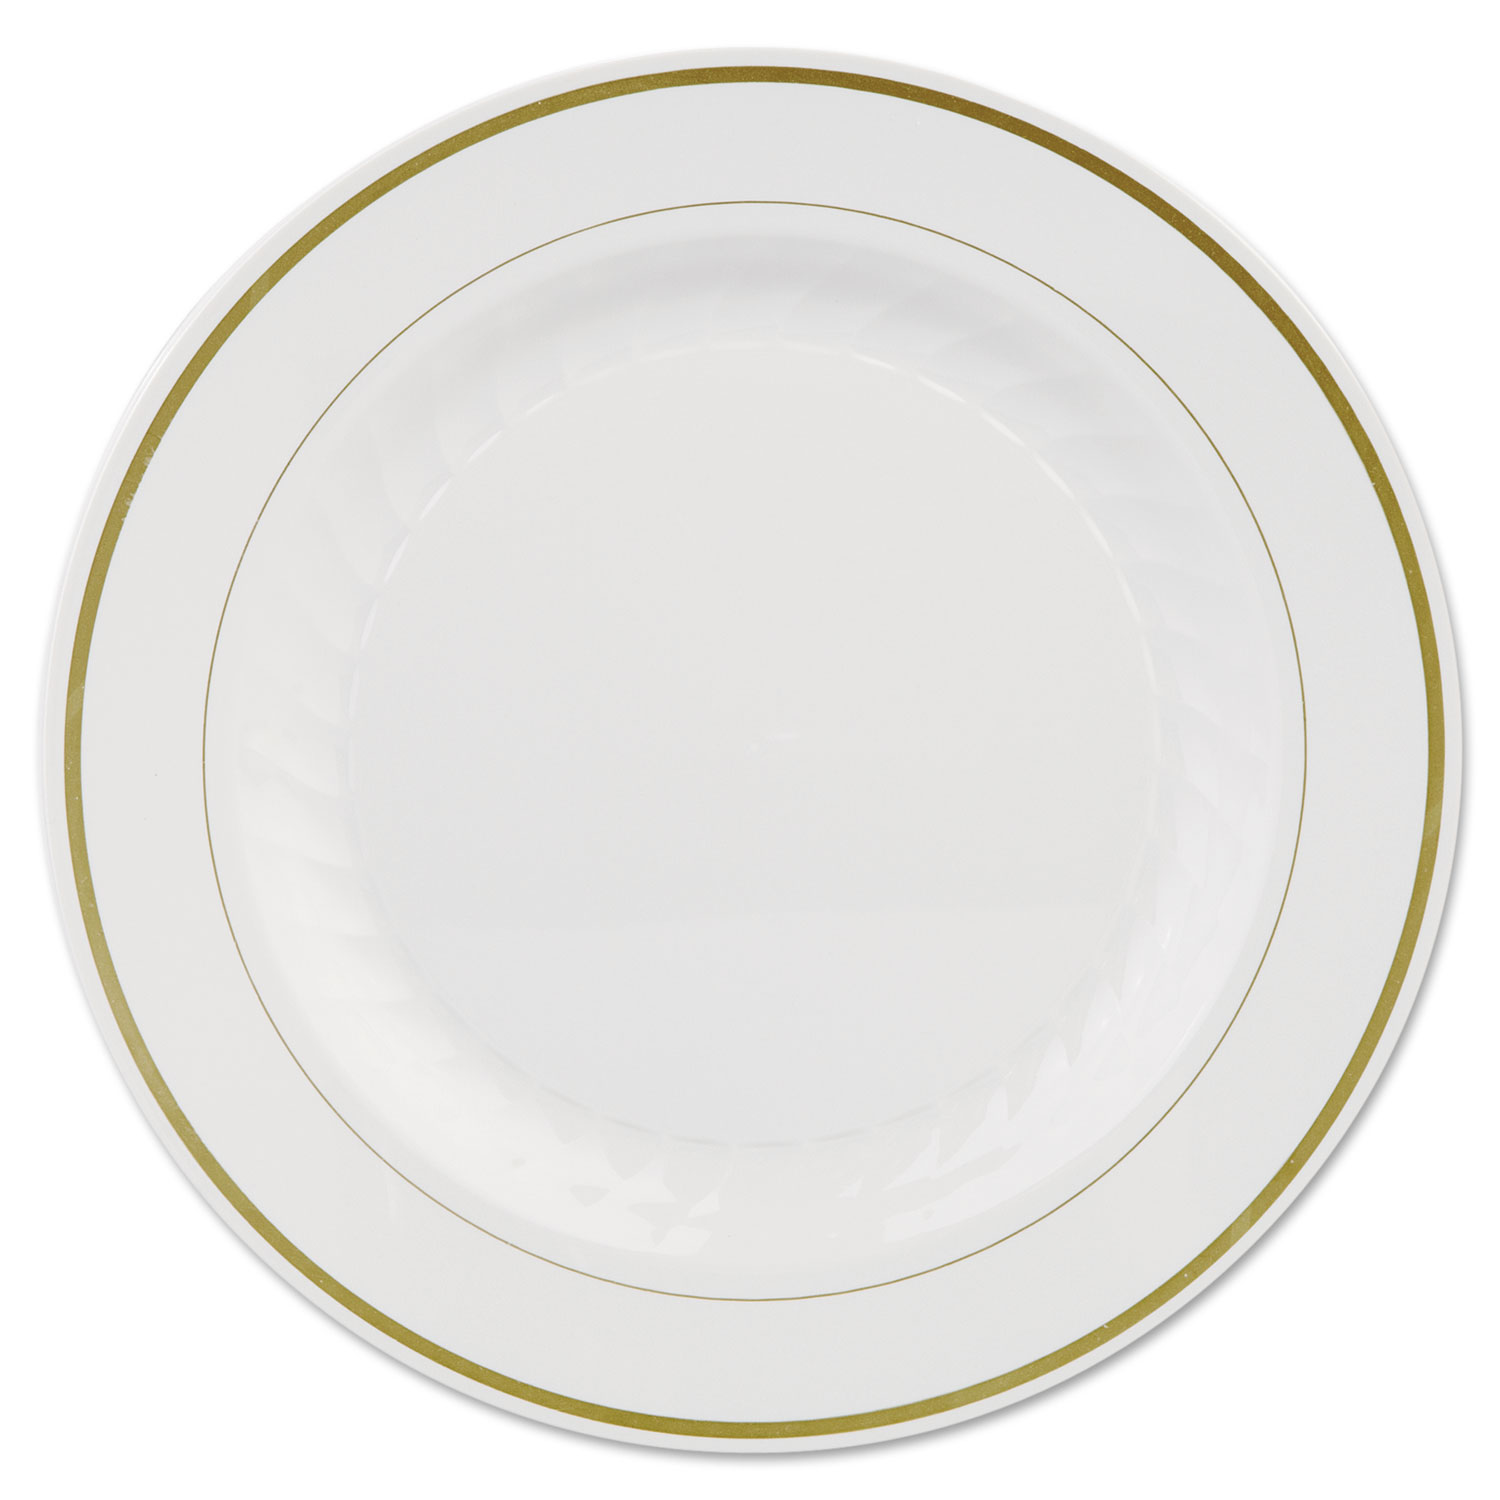 Masterpiece Plastic Plates, 10 1/4in, Ivory w/Gold Accents, Round